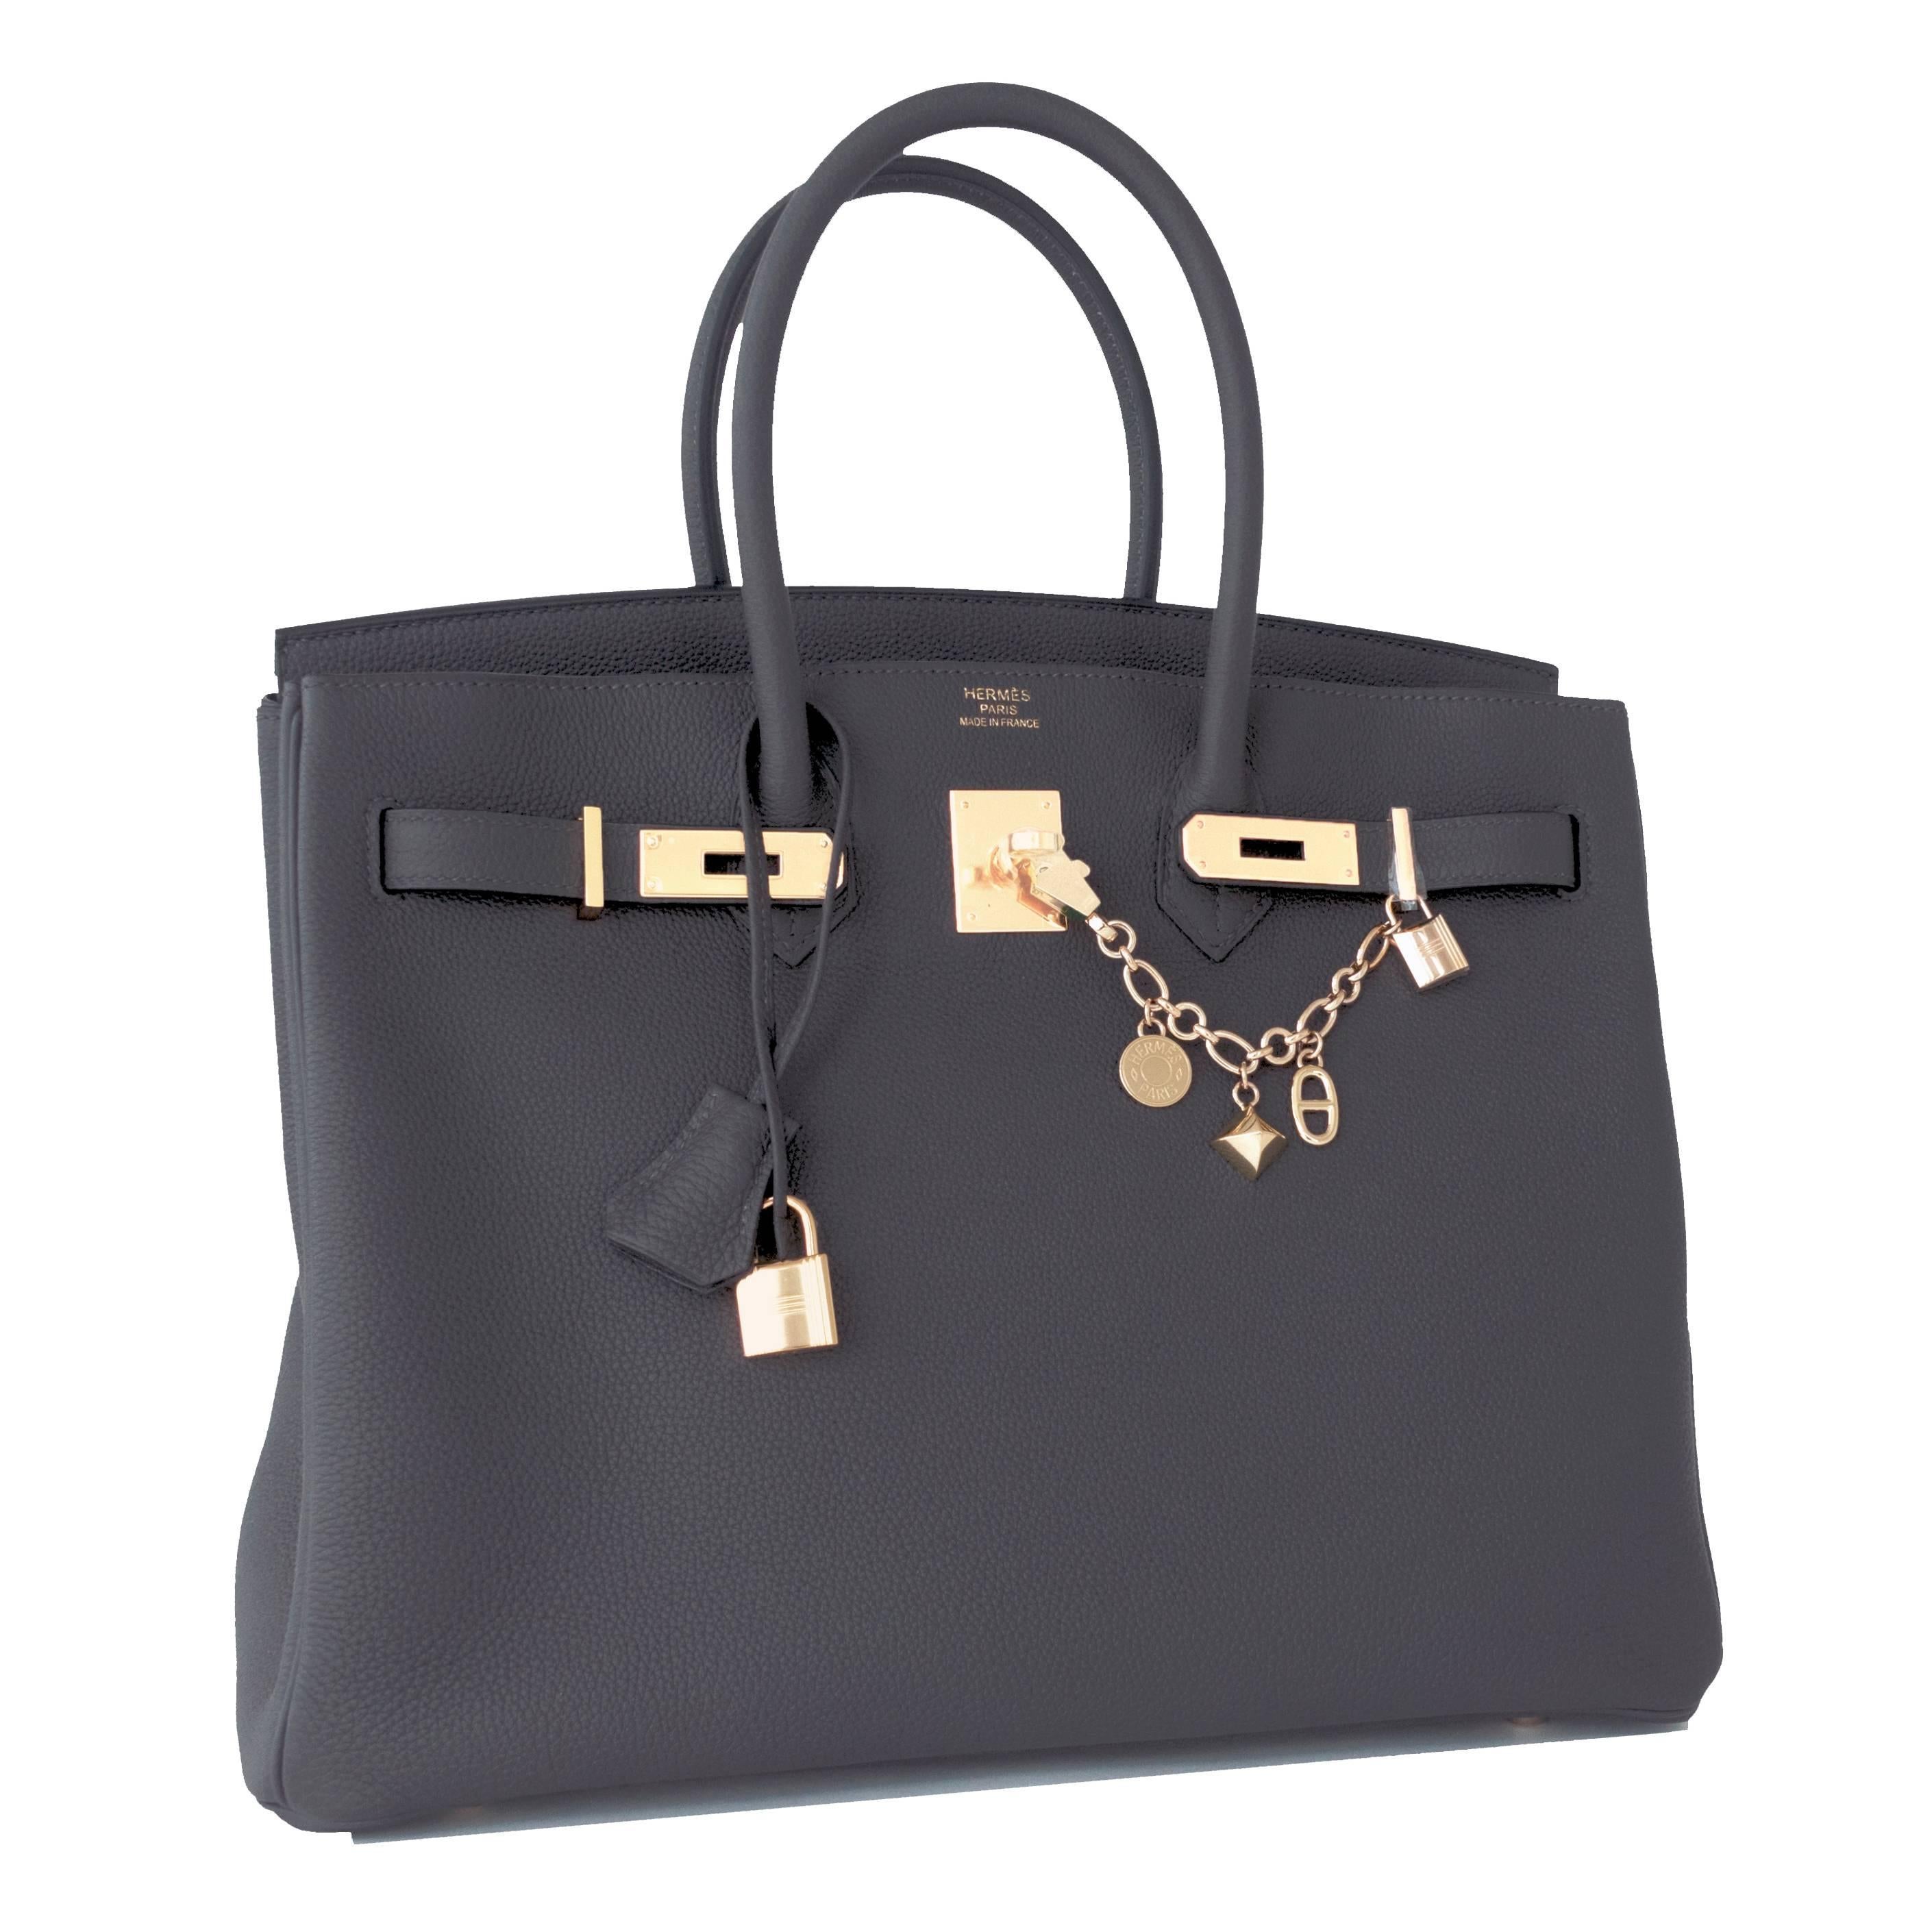 Hermes Graphite 35cm Togo Birkin Gold Hardware GHW Dark Gray Bag Superb
Store fresh. Pristine condition.  Interior X stamp purchased from store in 2016 (with plastic on hardware).  
Perfect gift!  Comes with keys, lock, clochette, a sleeper for